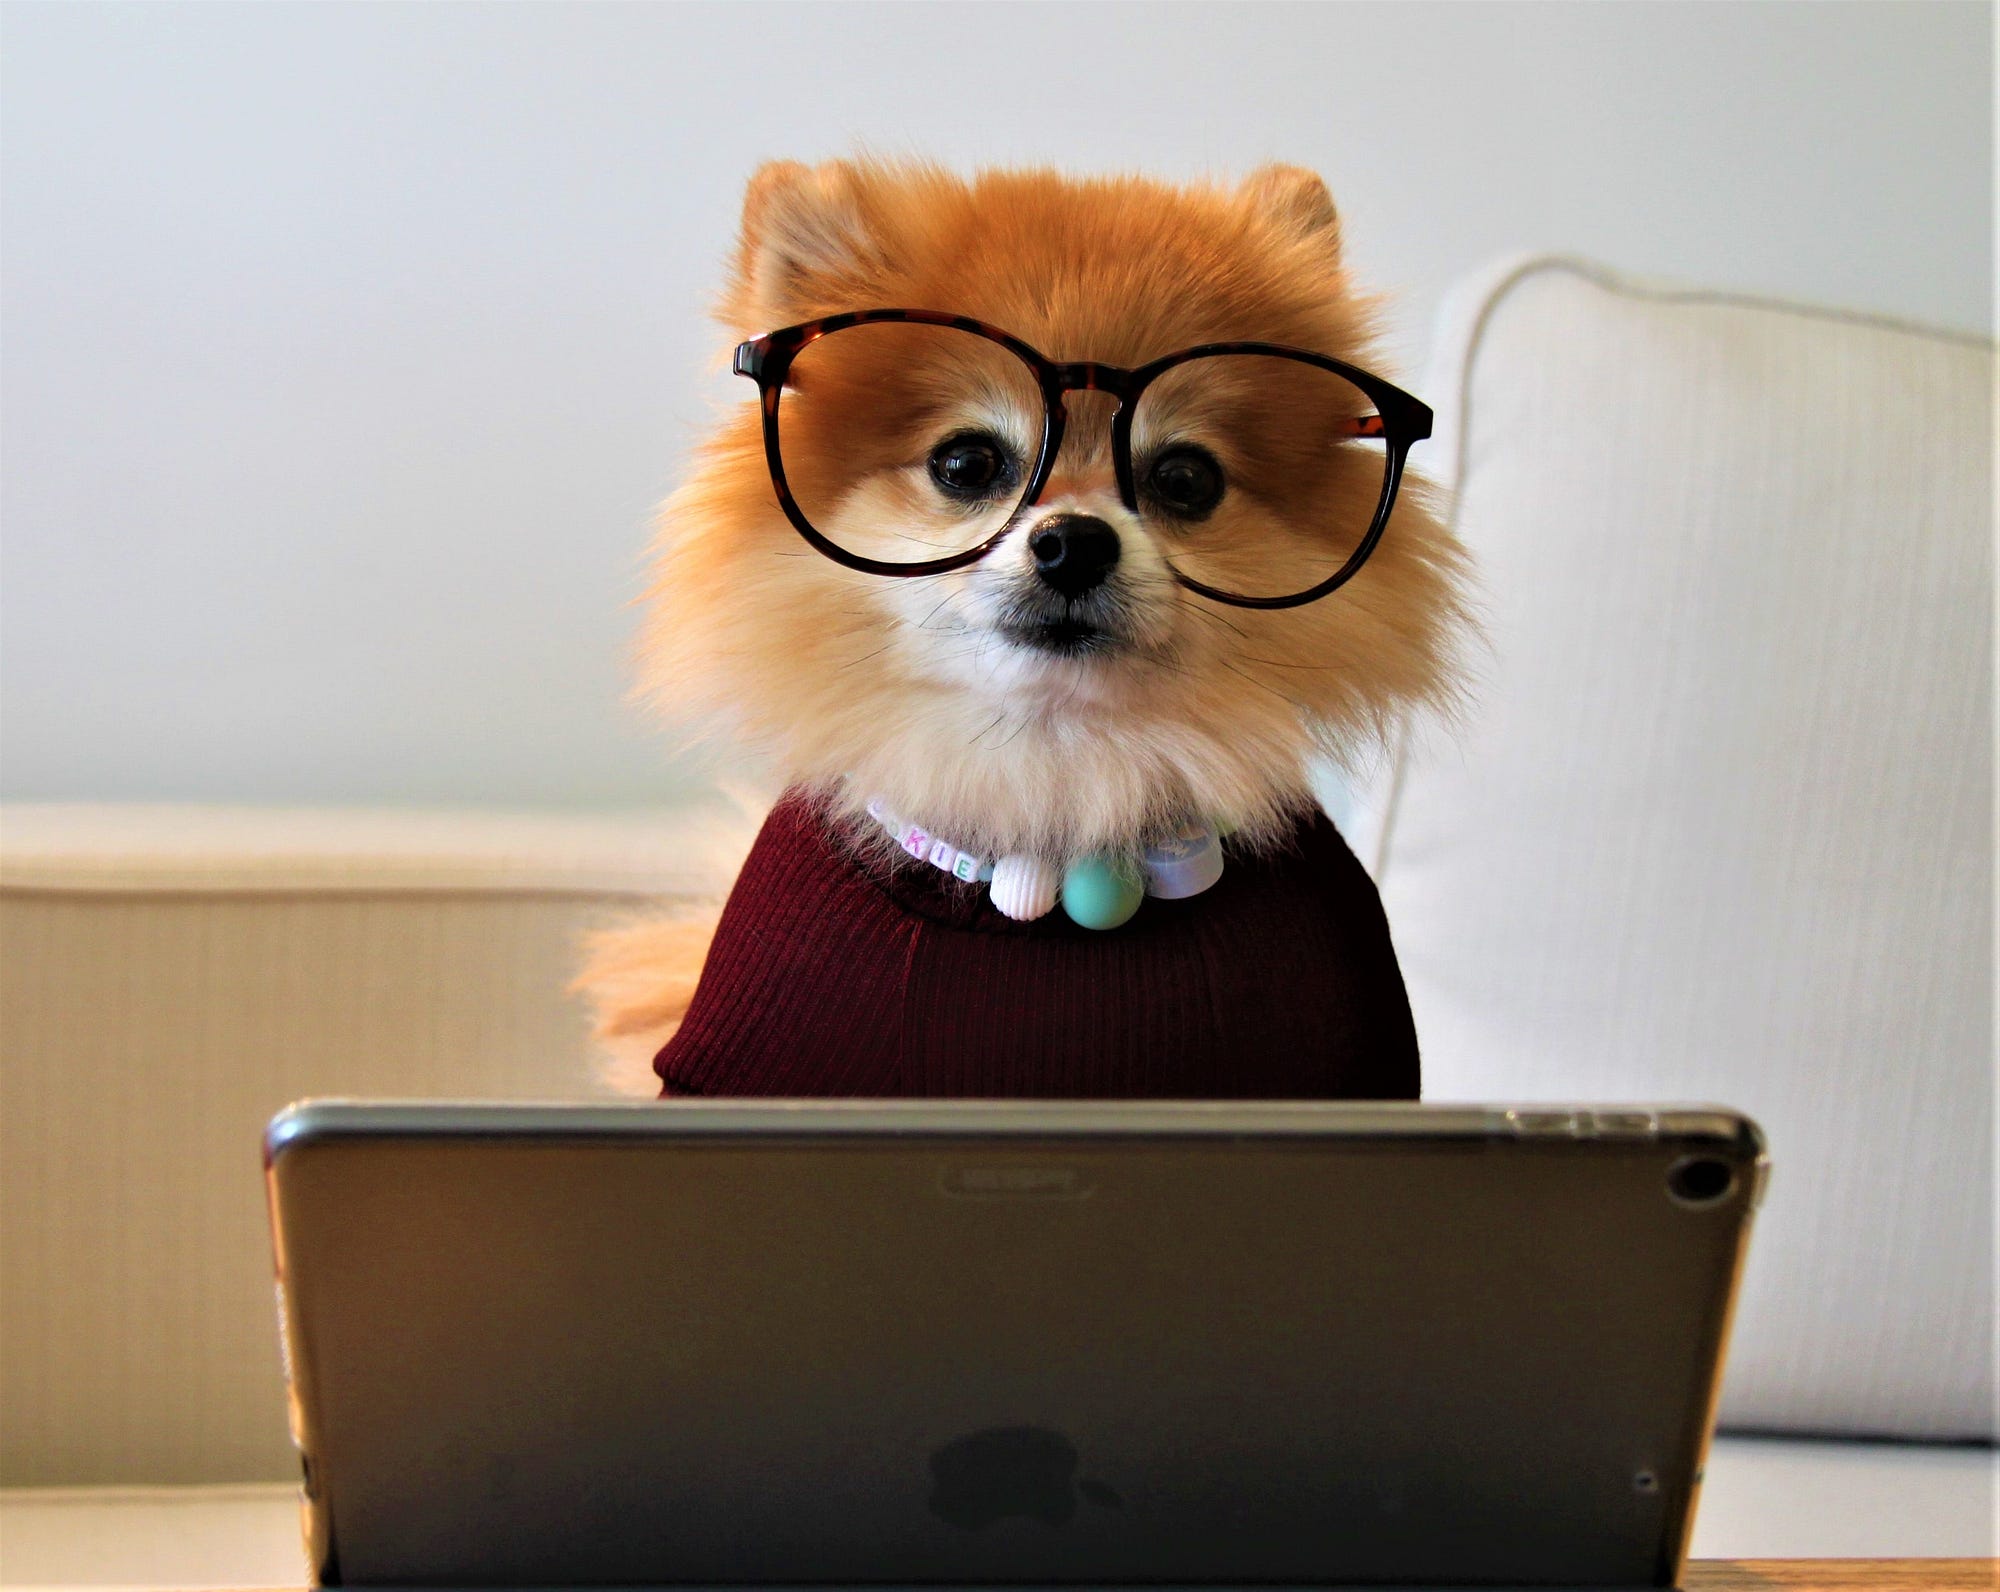 pomeranian wearing glasses and burgundy sweater sitting in front of computer